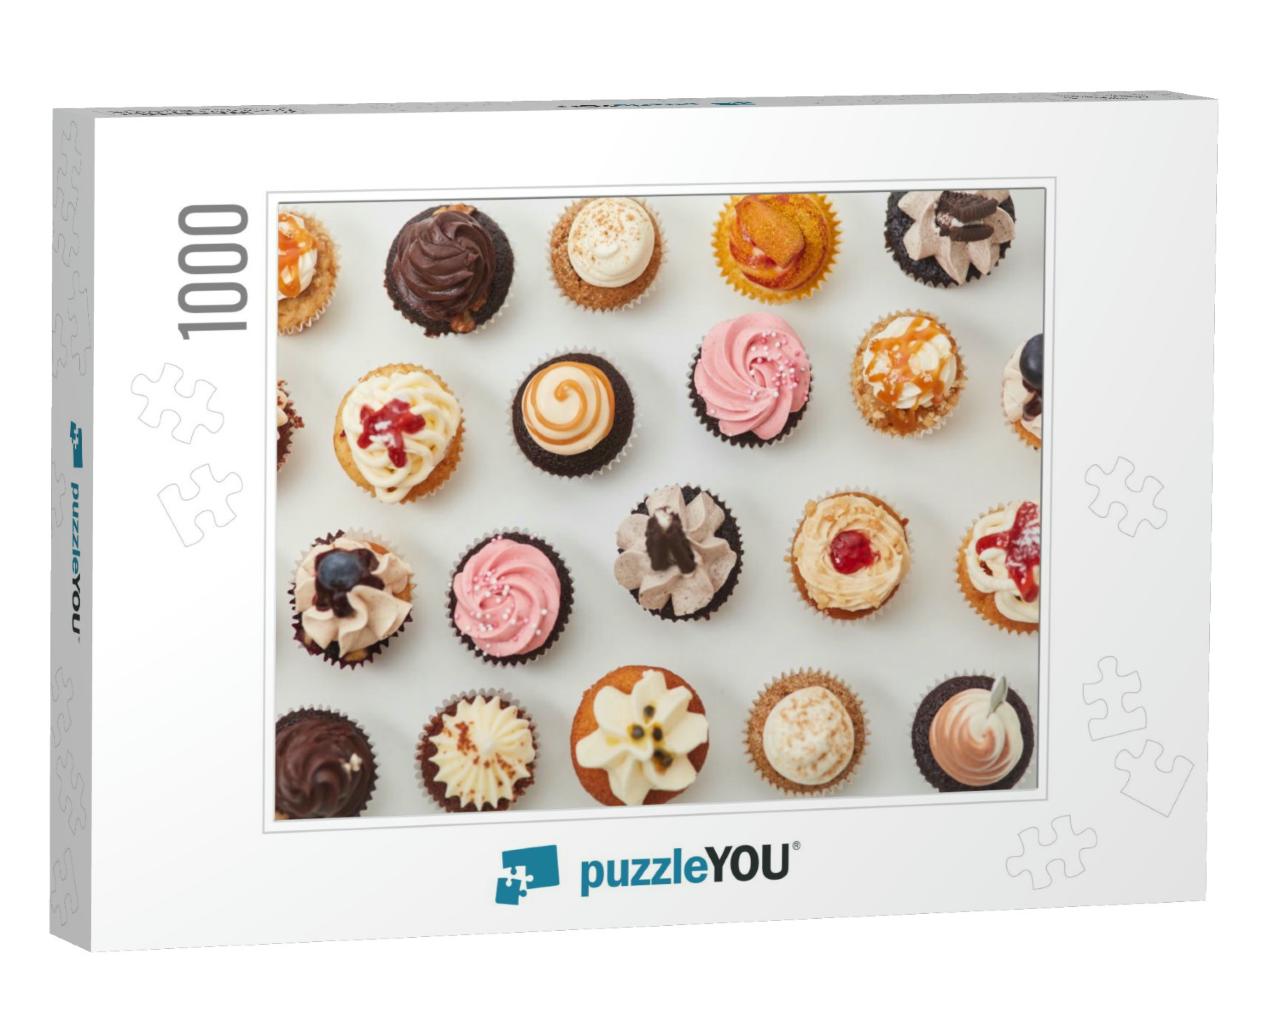 Lots of Assorted Colorful Cupcakes from Above with Toppin... Jigsaw Puzzle with 1000 pieces